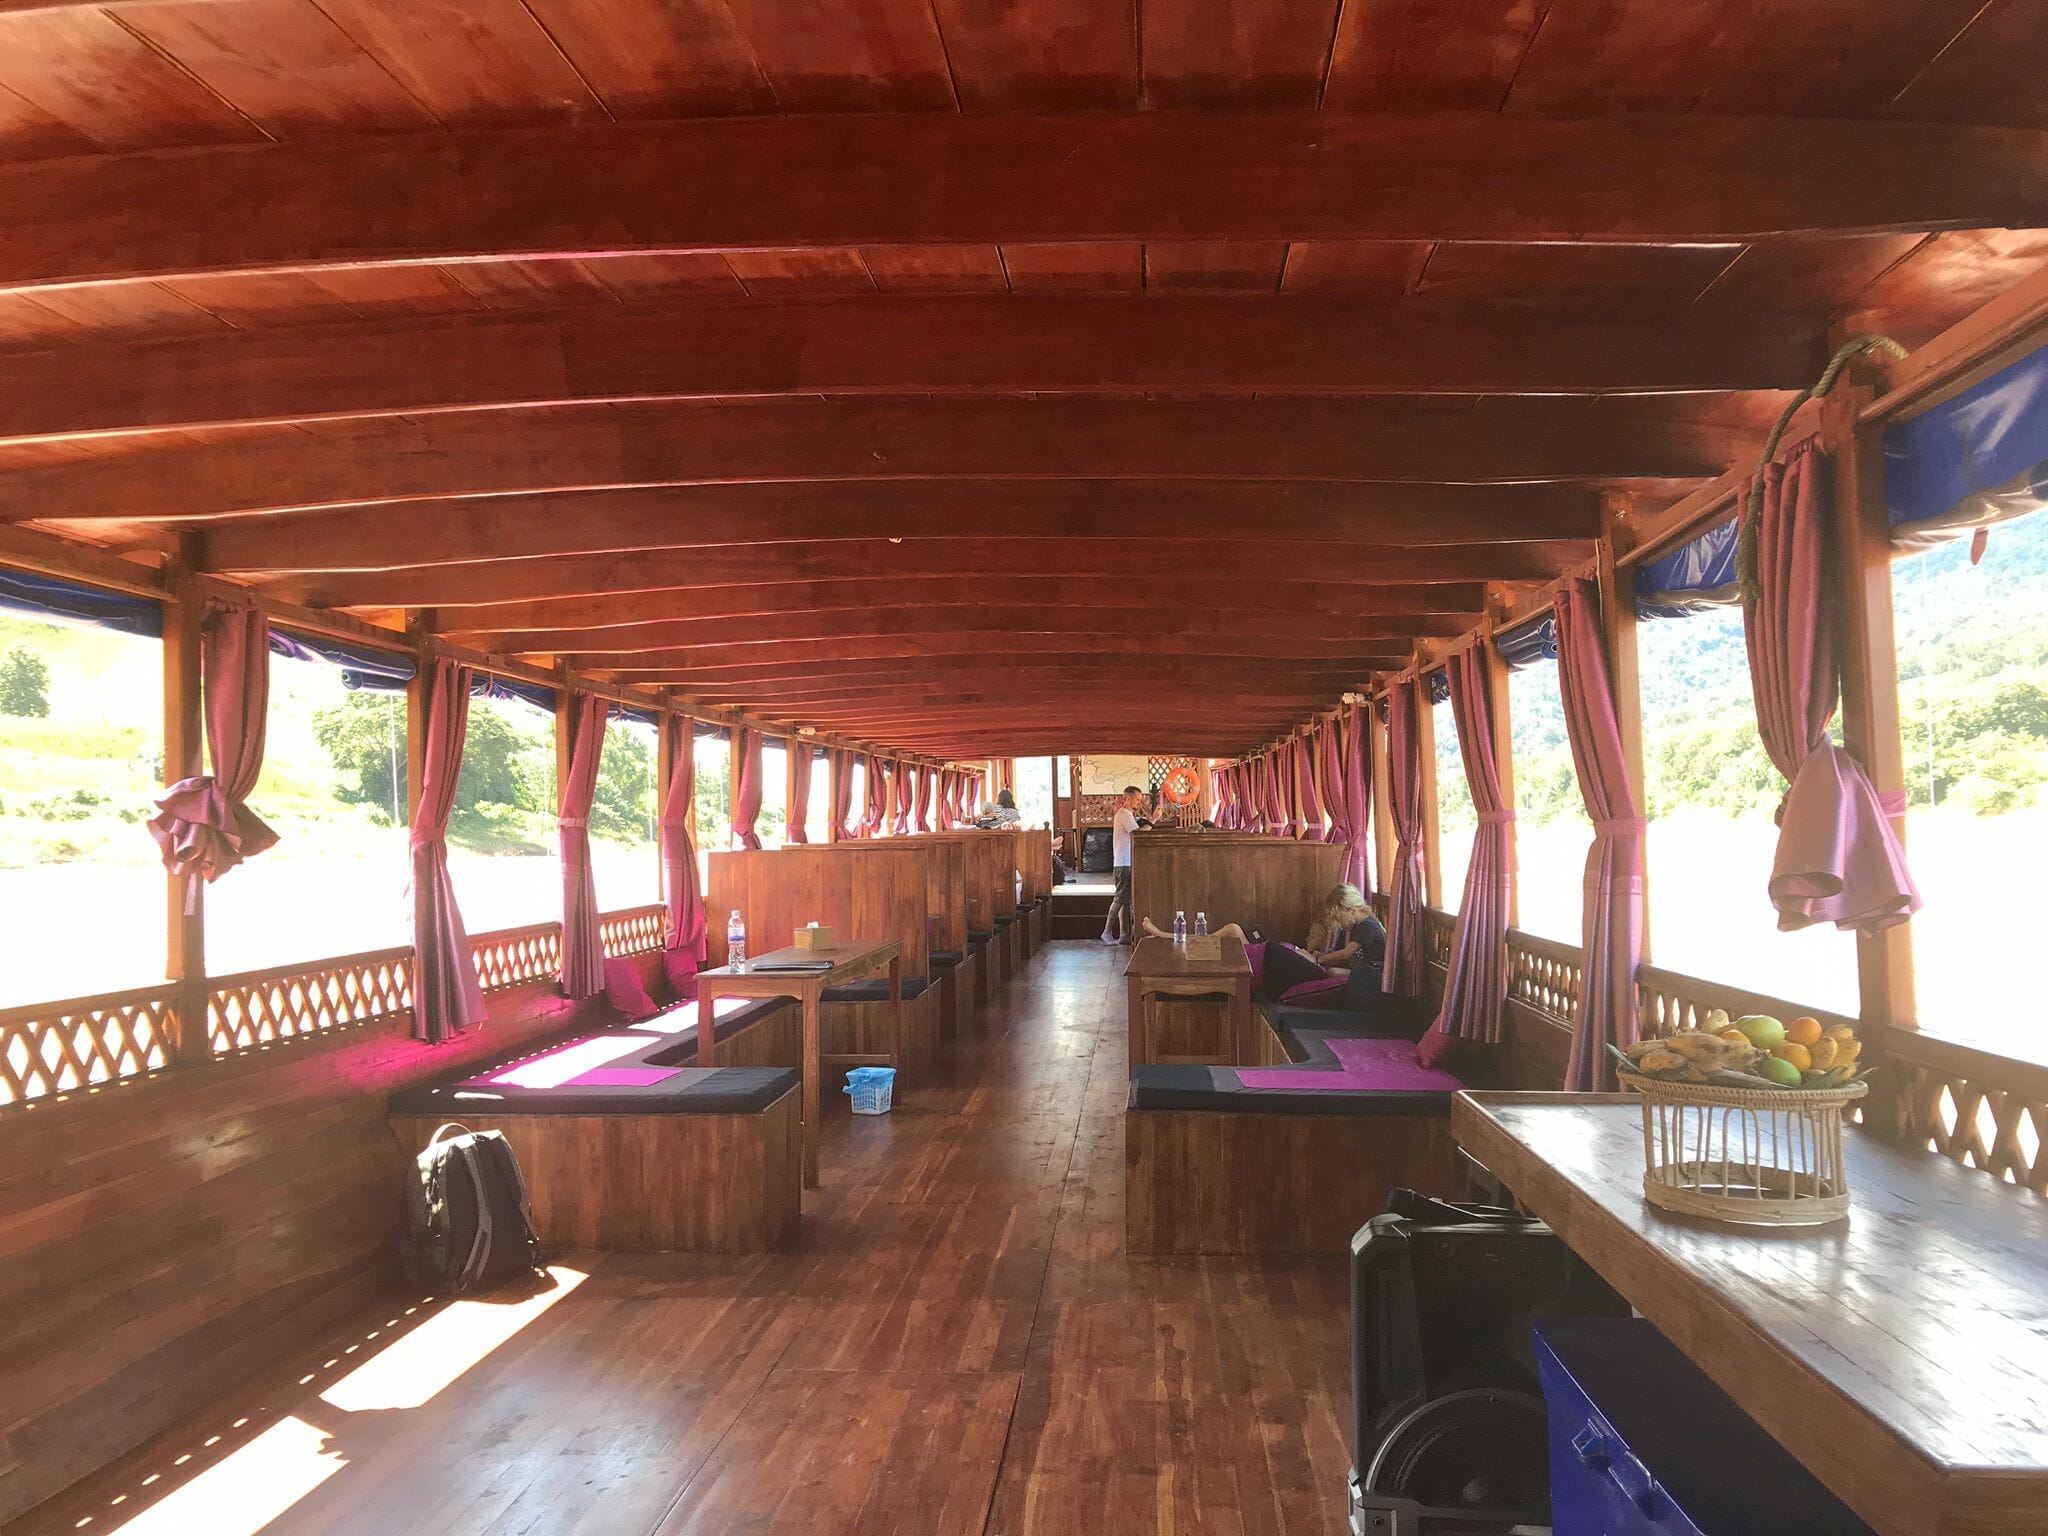 All you need to know about the Mekong River Cruise Tour from Chiang Mai to Luang Prabang